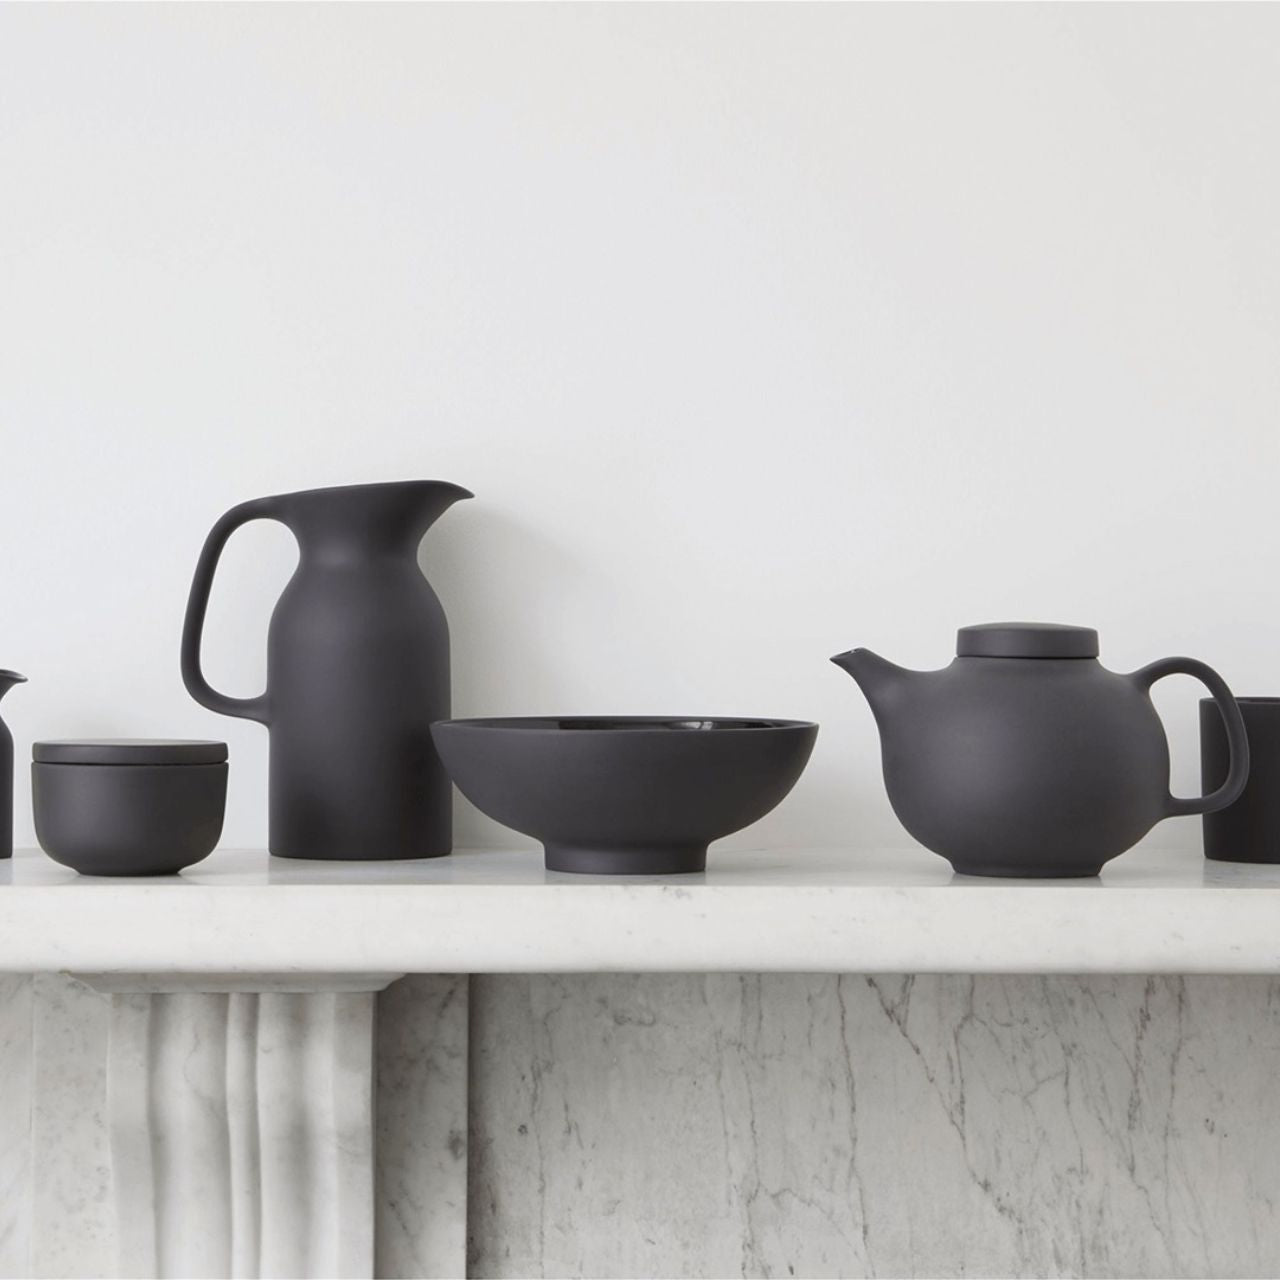 Serve fresh seasonal salad for one, a side of vegetables or some healthy snacks in this Olio Black Small Serving Bowl by Barber Osgerby. Crafted from durable stoneware, this black bowl comes in a matte graphic black glaze on the outside and contrasting glossy black glaze inside.